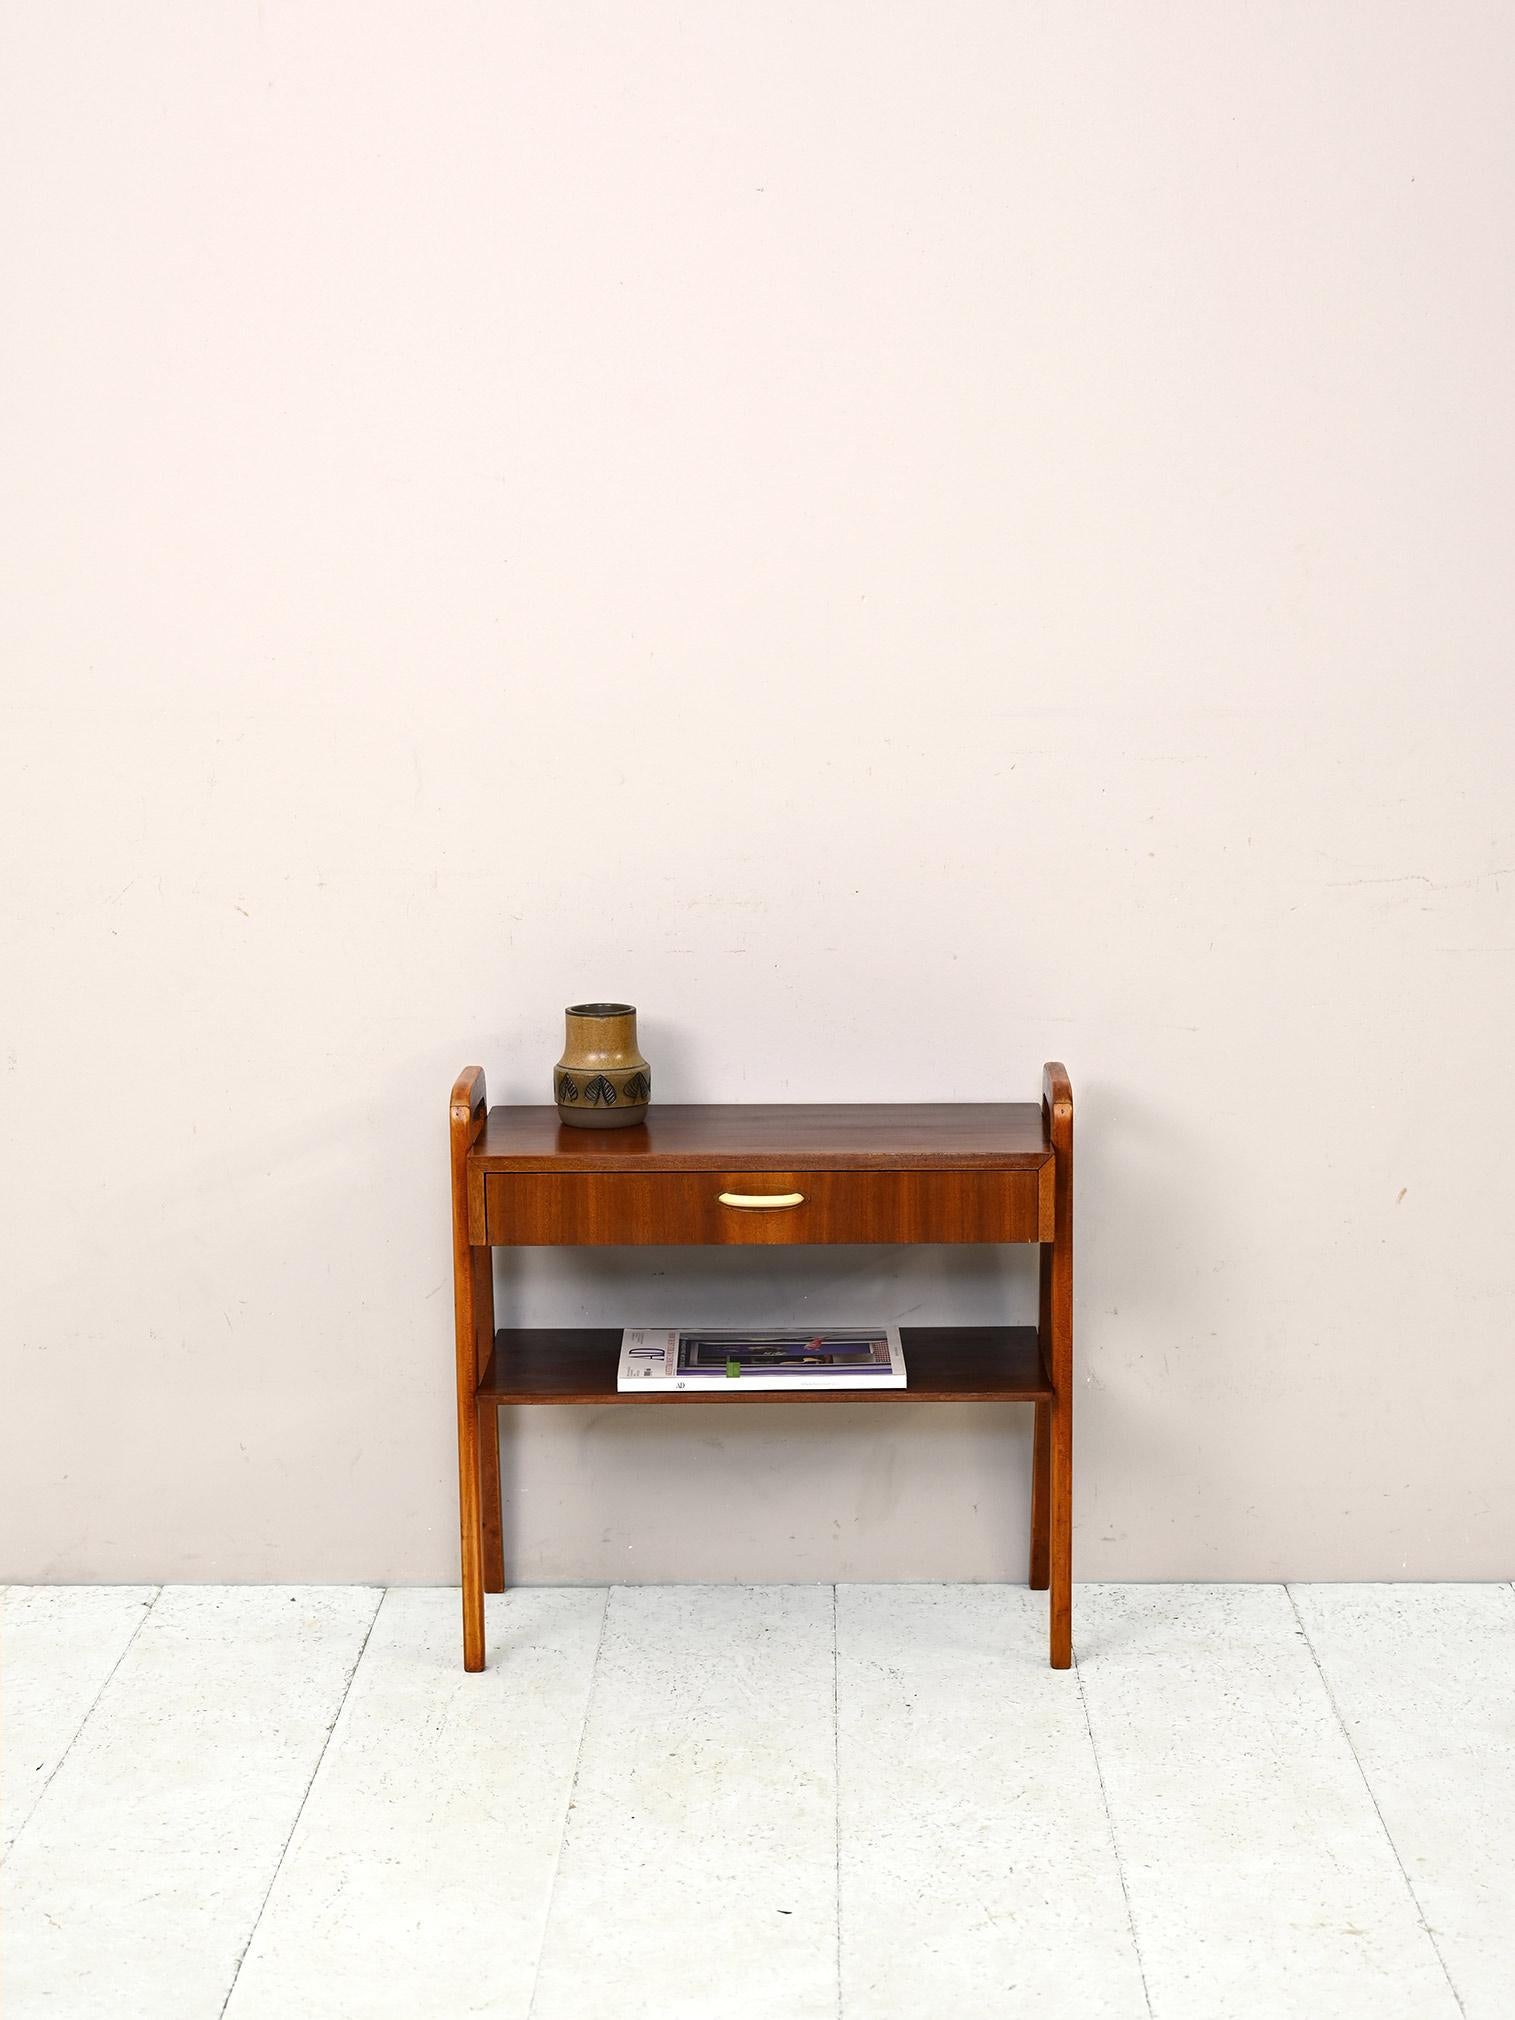 Vintage 1950s nightstand.

This piece of Scandinavian modernism features a convenient drawer with a white plastic handle and a magazine rack top. Square legs in the shape of an upturned U go to form two handles on the sides that allow the piece of